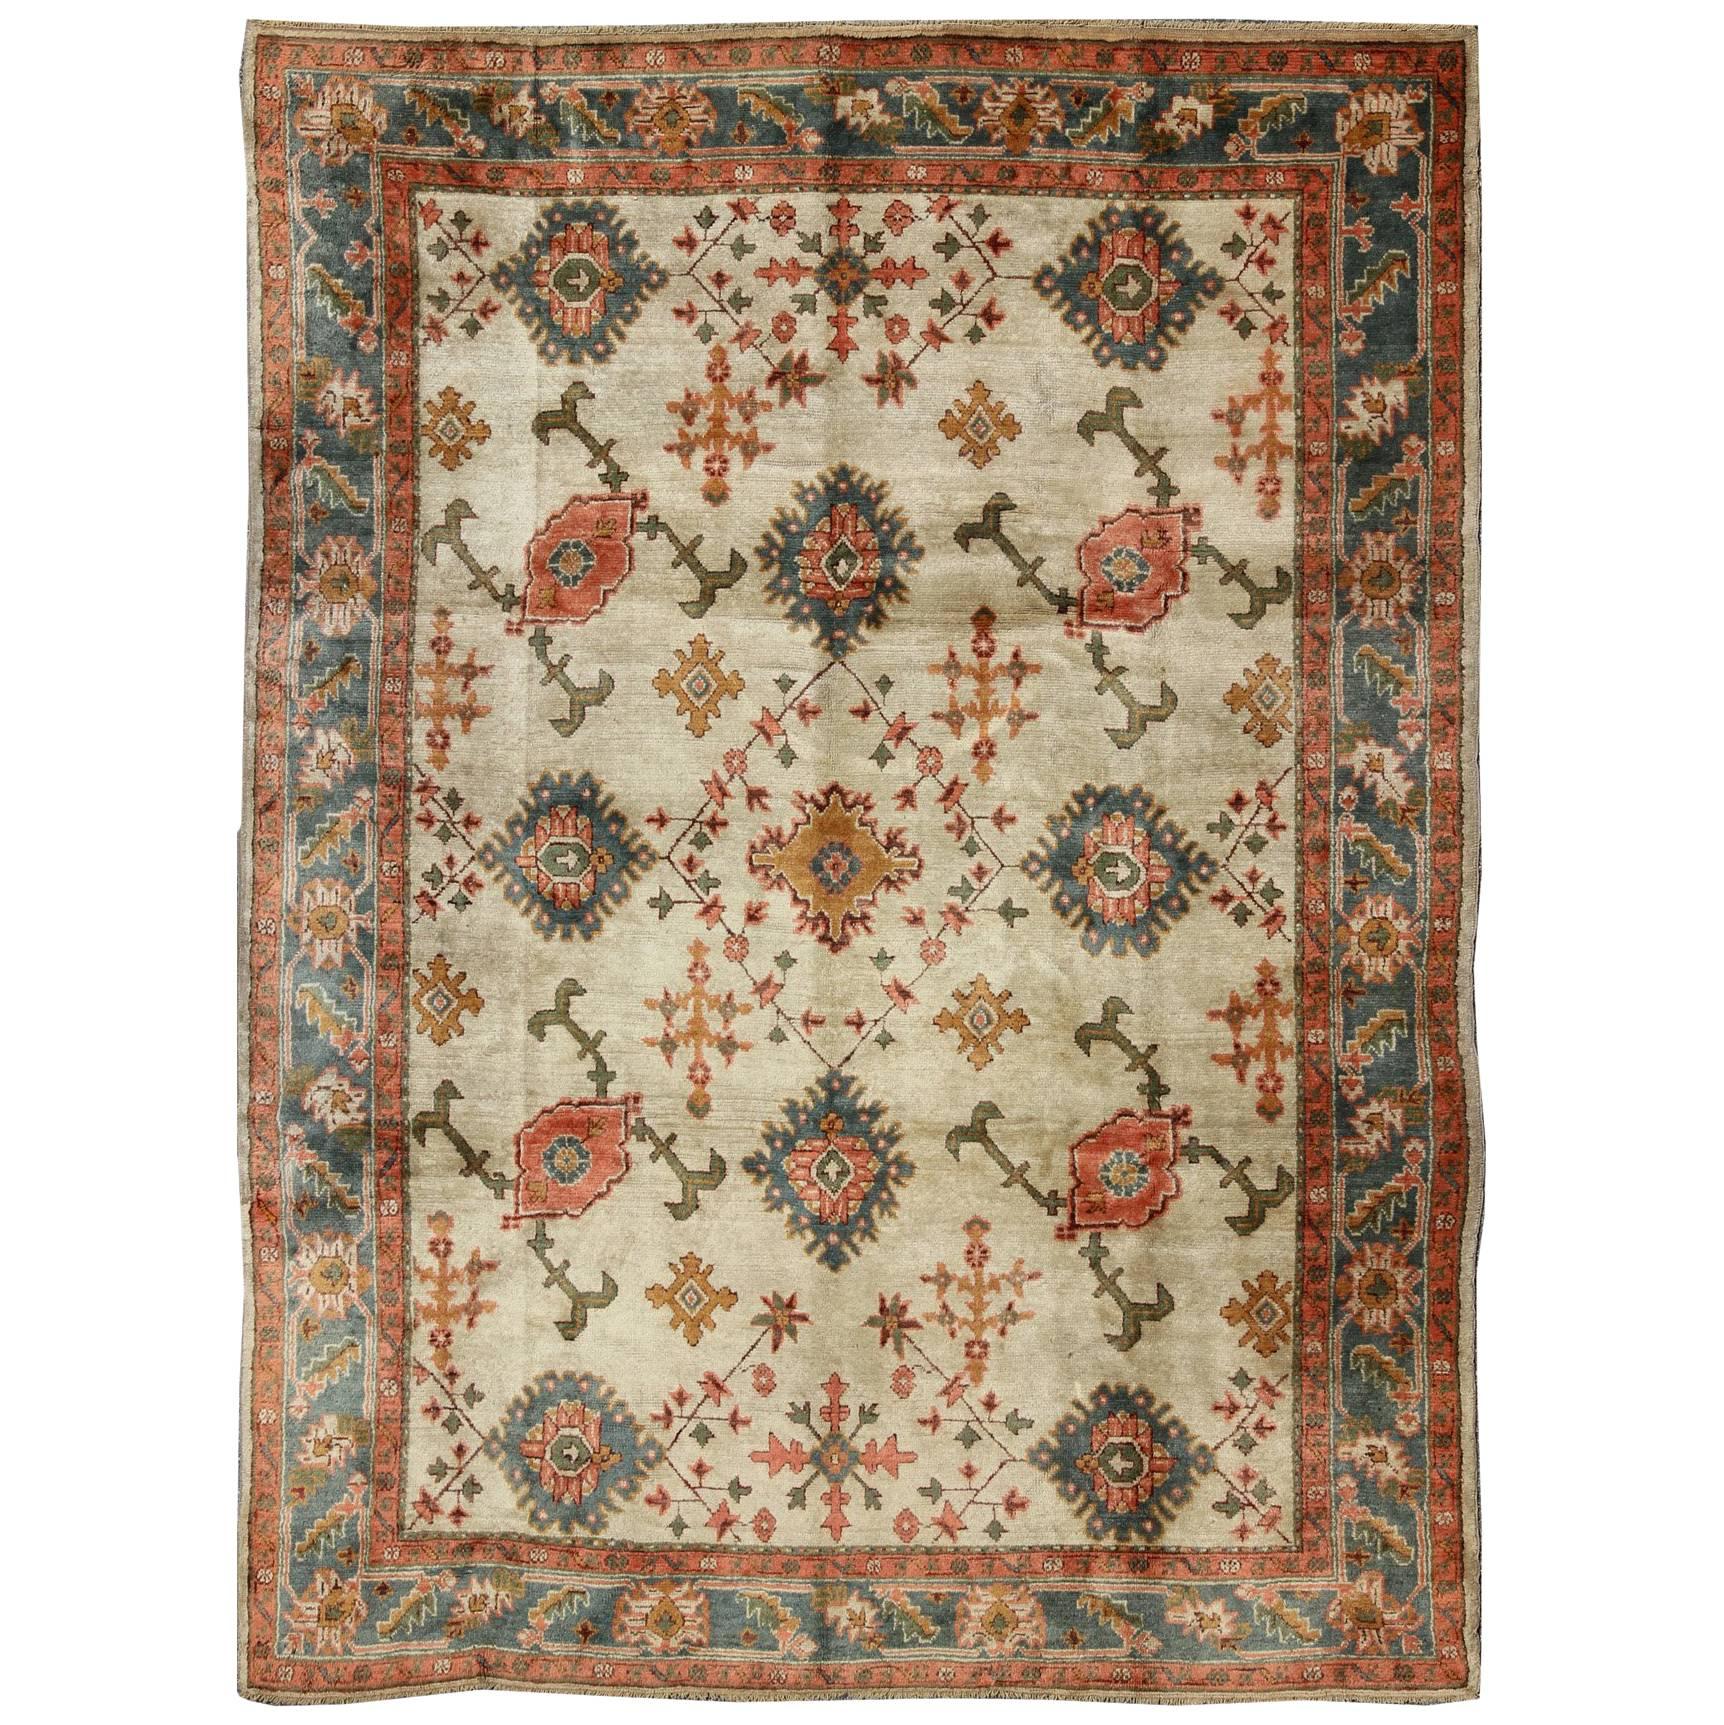 Antique Turkish Oushak Rug With All Over Design in Teal, Cream & Coral